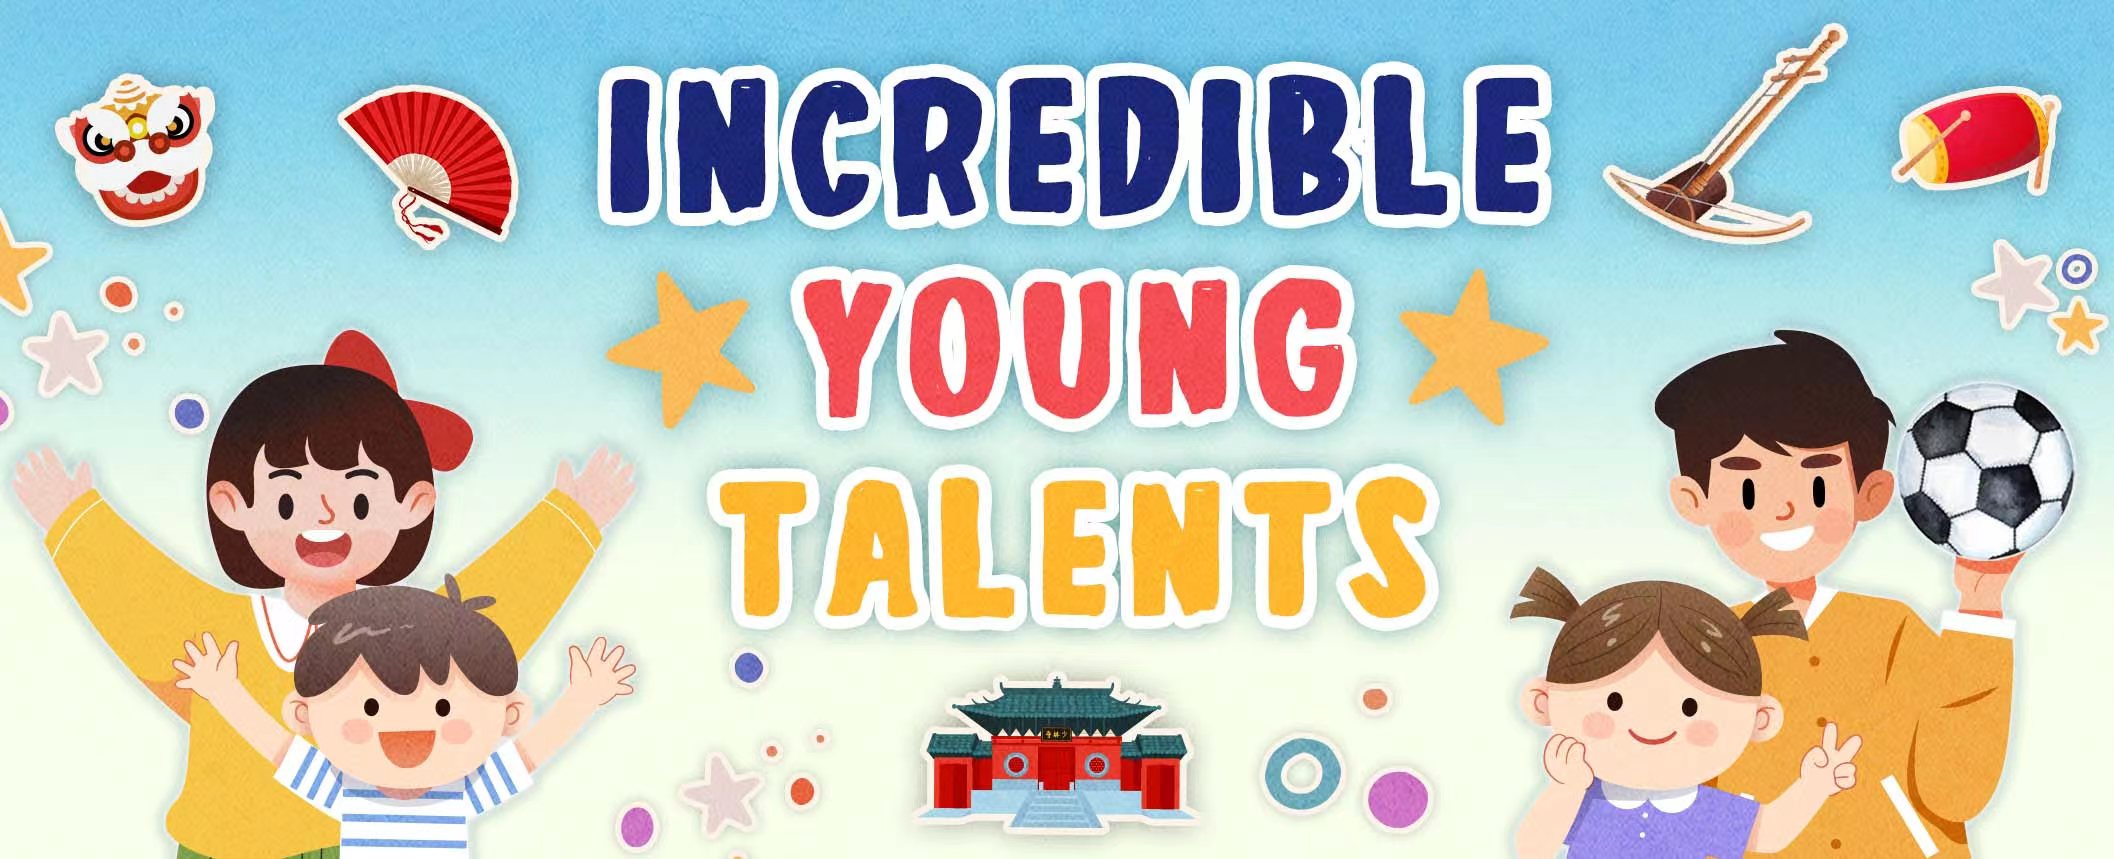 Incredible Young Talents